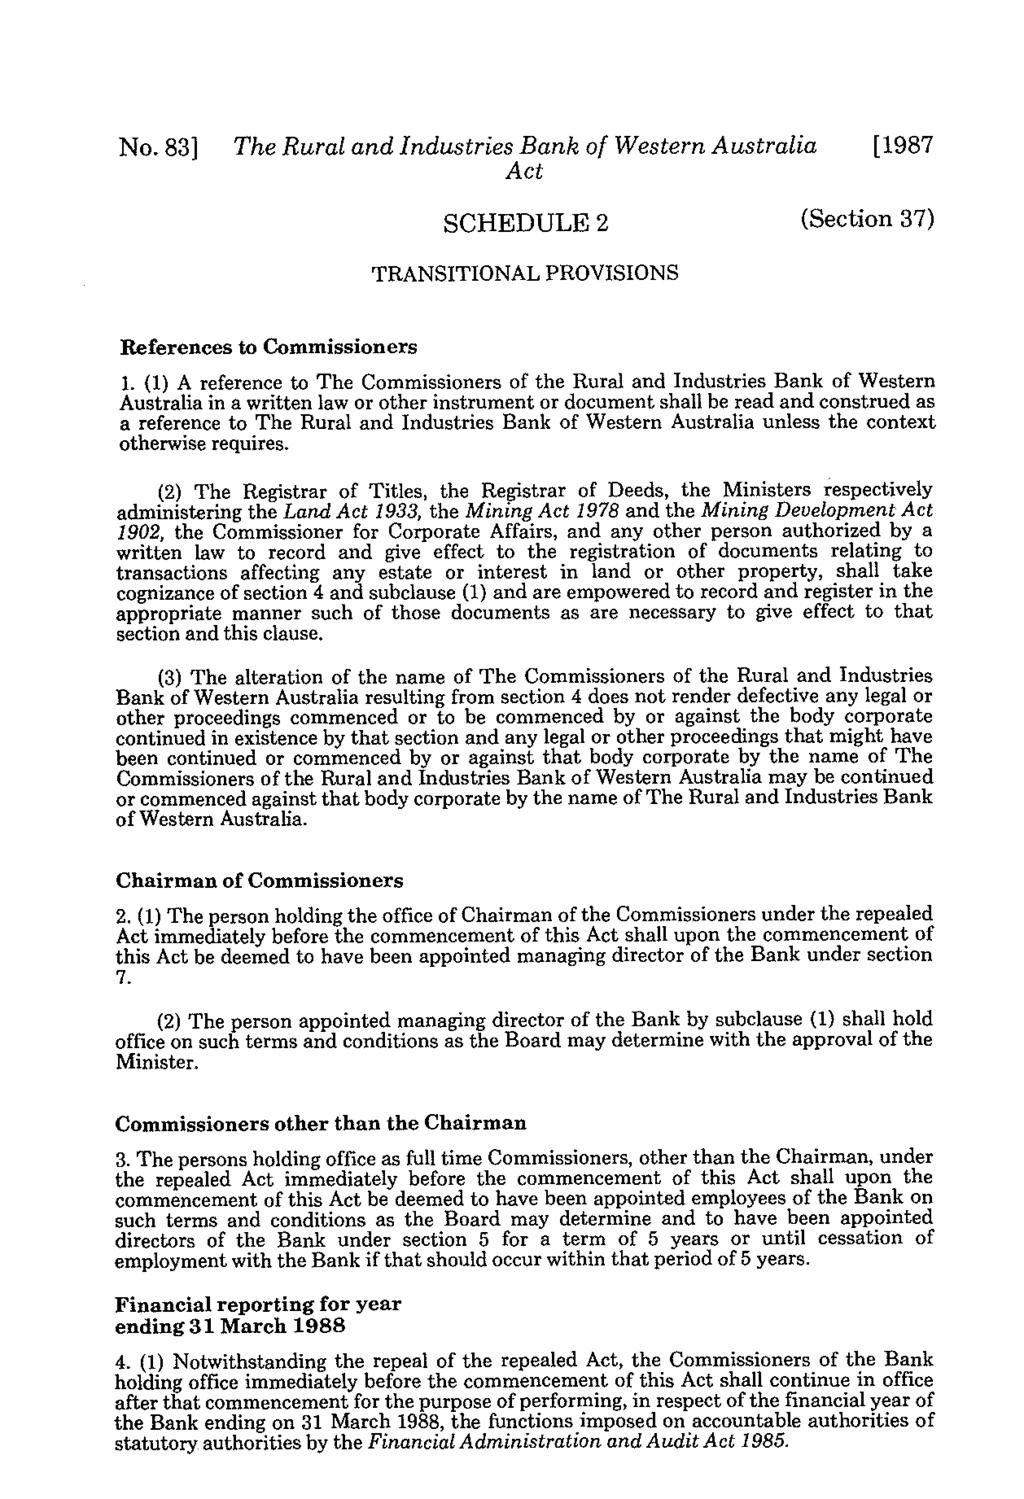 No. 83] The Rural and Industries Bank of Western Australia [1987 SCHEDULE 2 (Section 37) TRANSITIONAL PROVISIONS References to Commissioners I.